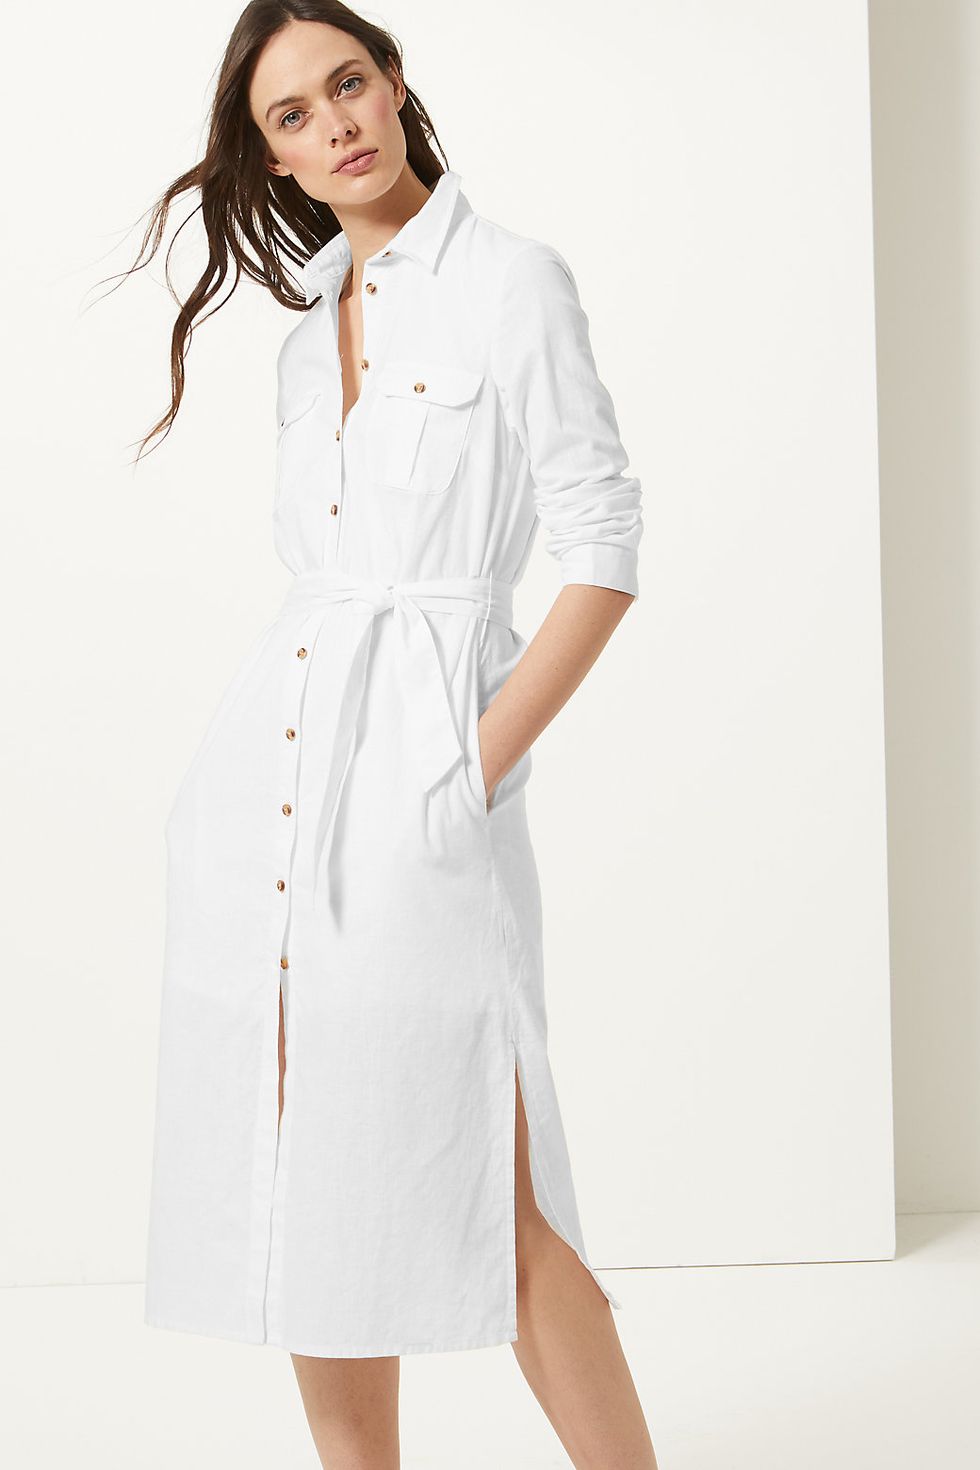 9 stylish white summer dresses on the high street right now